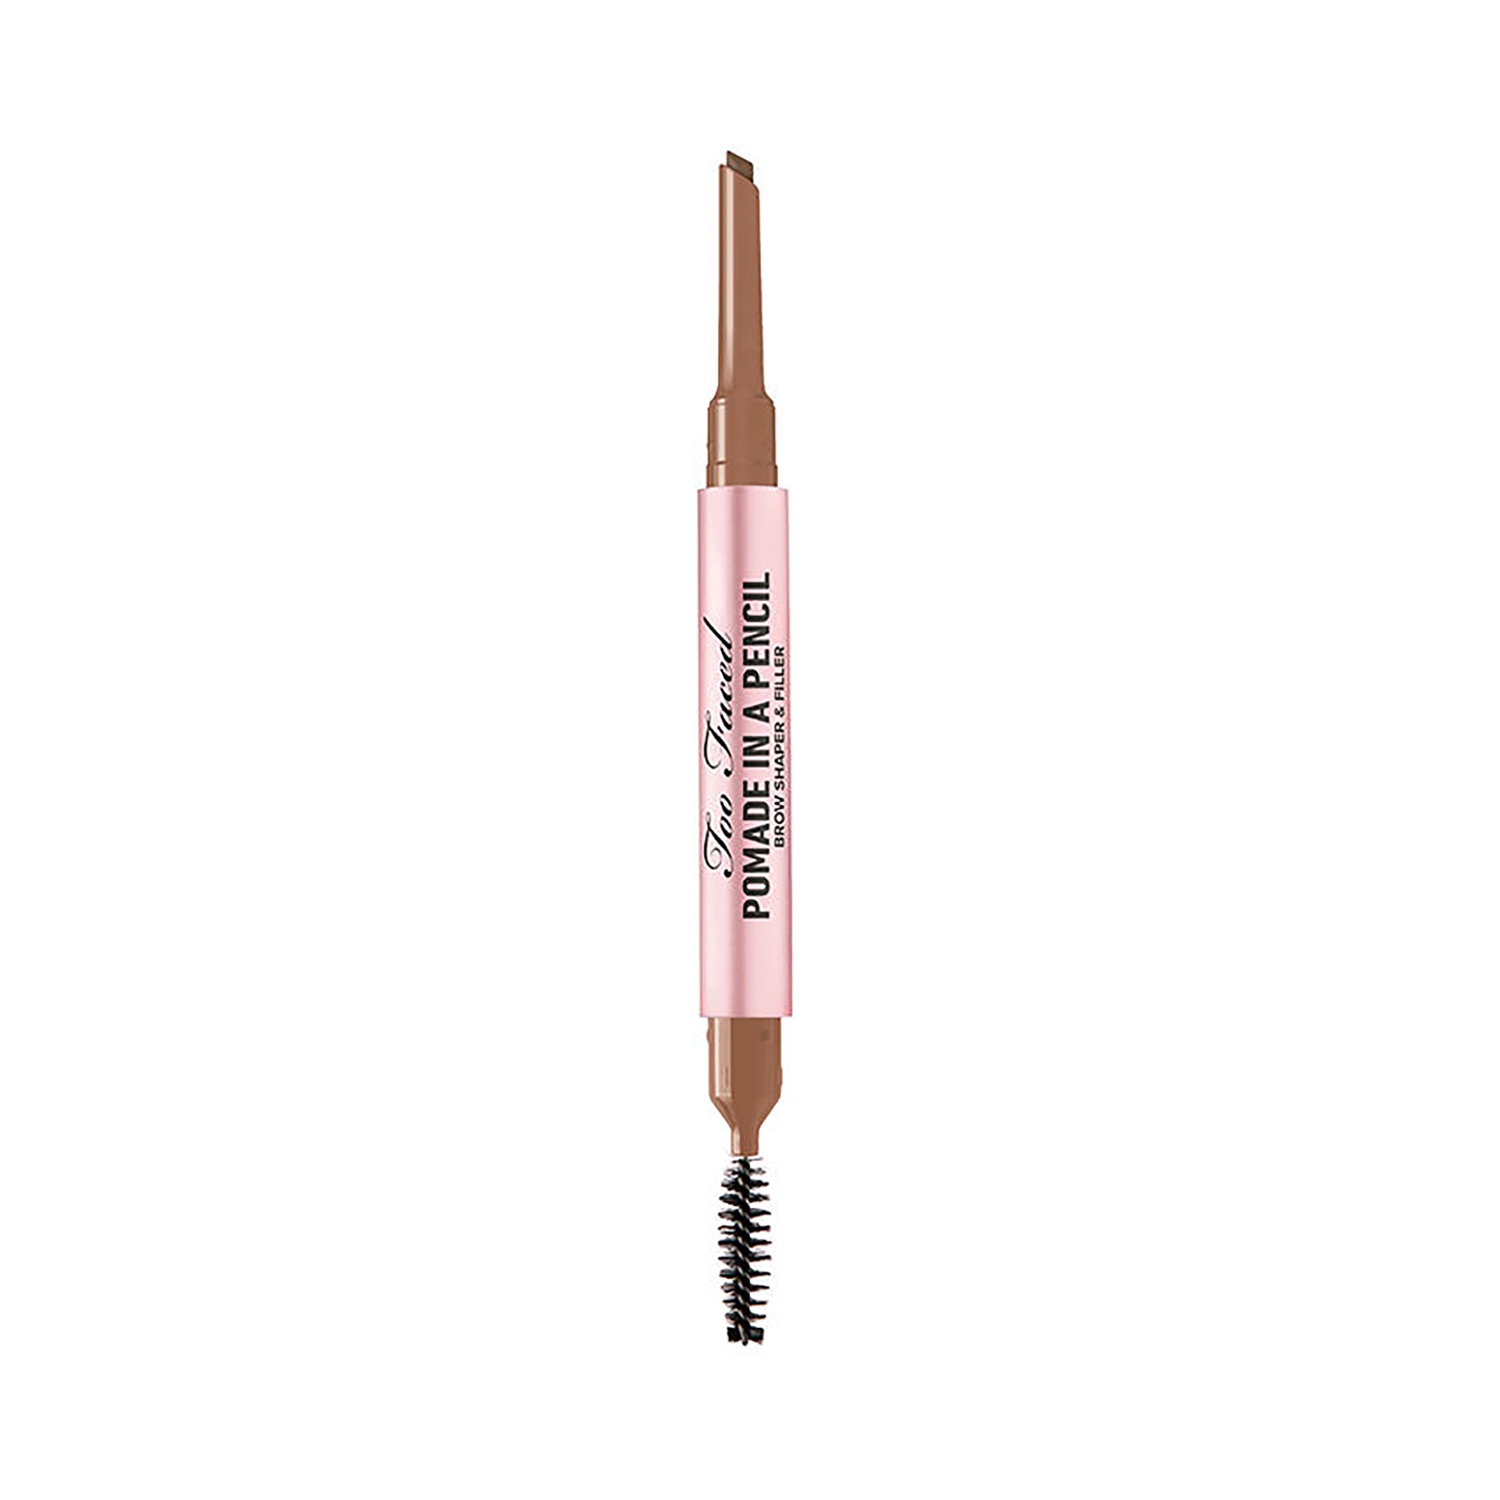 Too Faced | Too Faced Pomade In A Pencil Eyebrow Shaper & Filler - Soft Black (0.19g)